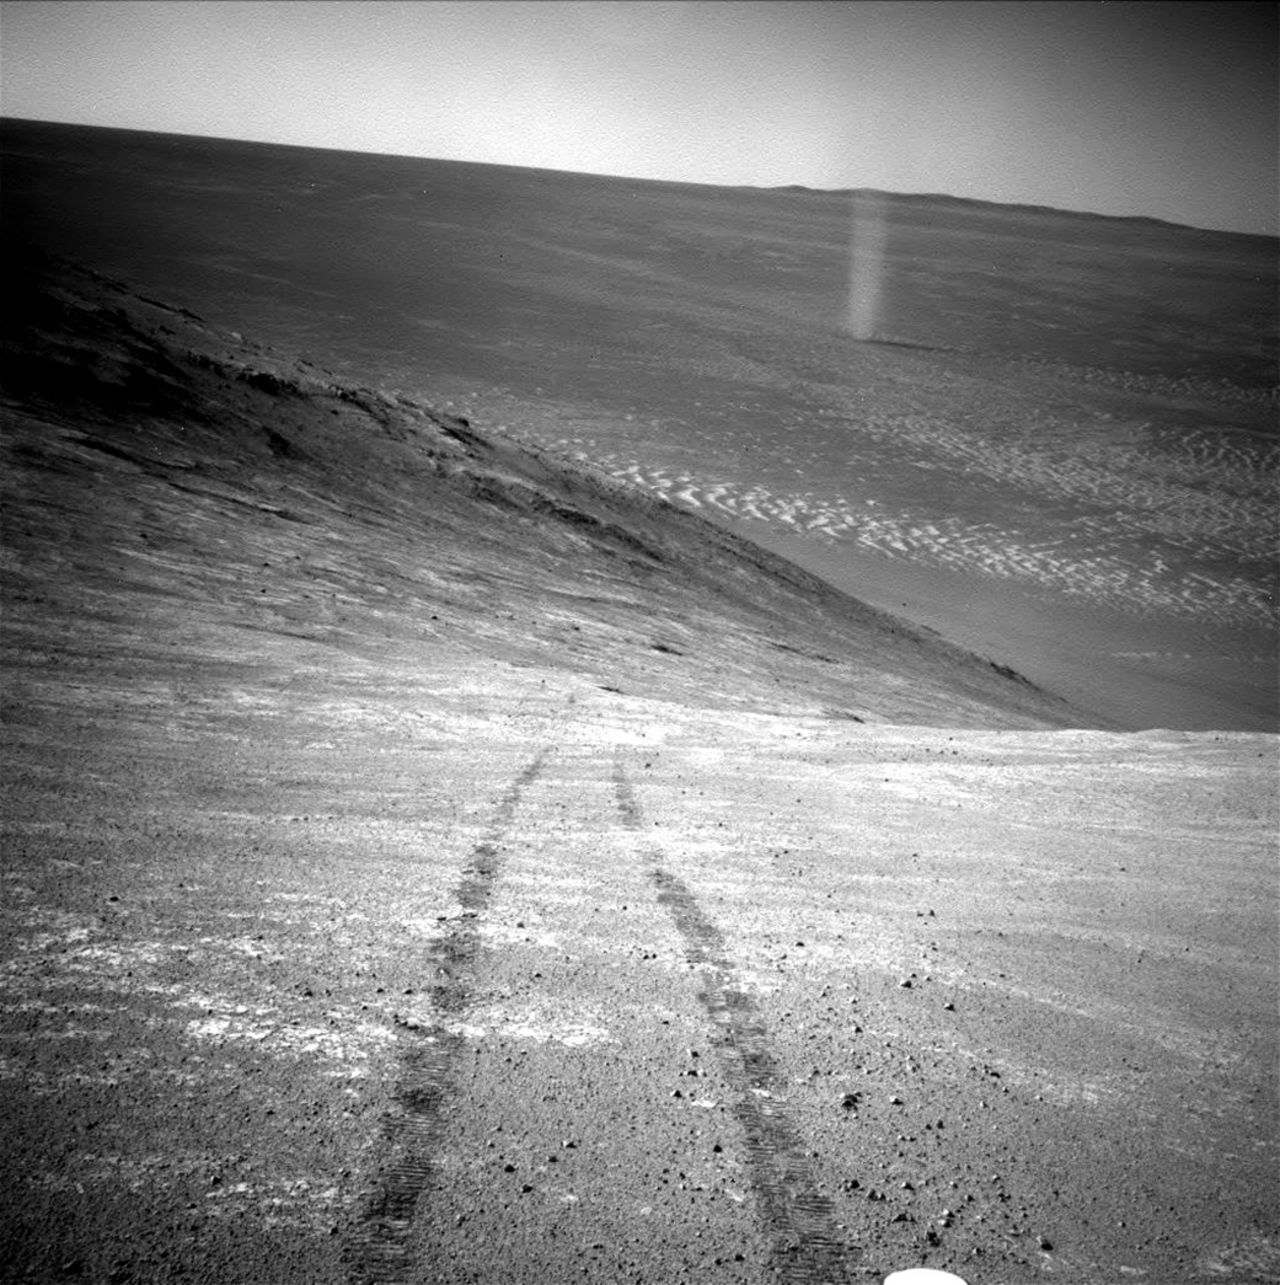 From its perch high on a ridge, Opportunity recorded this image of a Martian dust devil twisting through the valley below. Just as on Earth, a dust devil is created by a rising, rotating column of hot air. When the column whirls fast enough, it picks up tiny grains of dust from the ground, making the vortex visible.